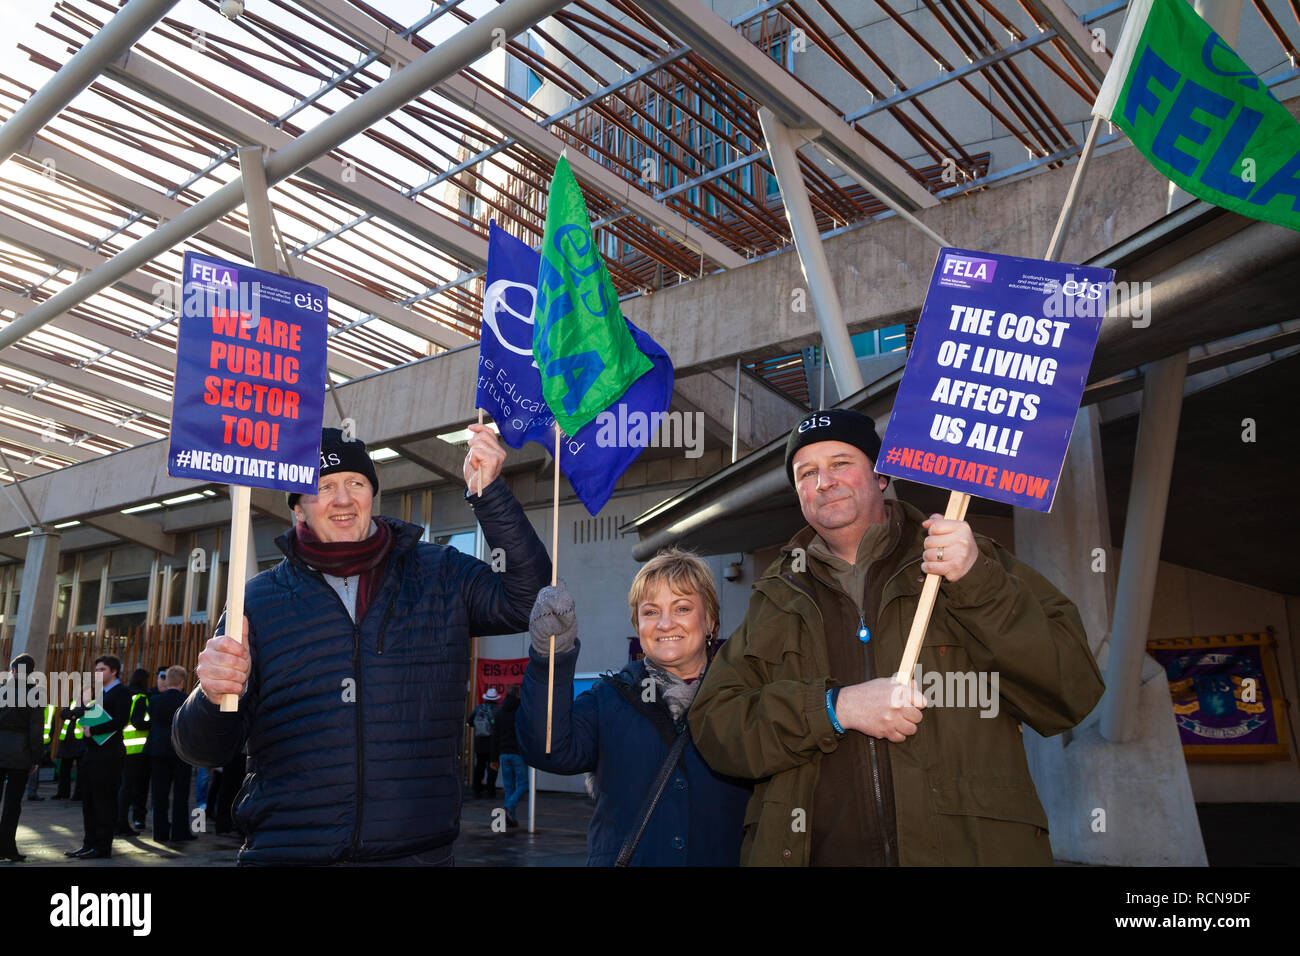 Edinburgh,United Kingdom. 16 January 2019. EIS Educational Institute of Scotland Union members outside the Scottish Parliament because as lectures strike over pay today. © Richard Newton / Alamy Live News Stock Photo